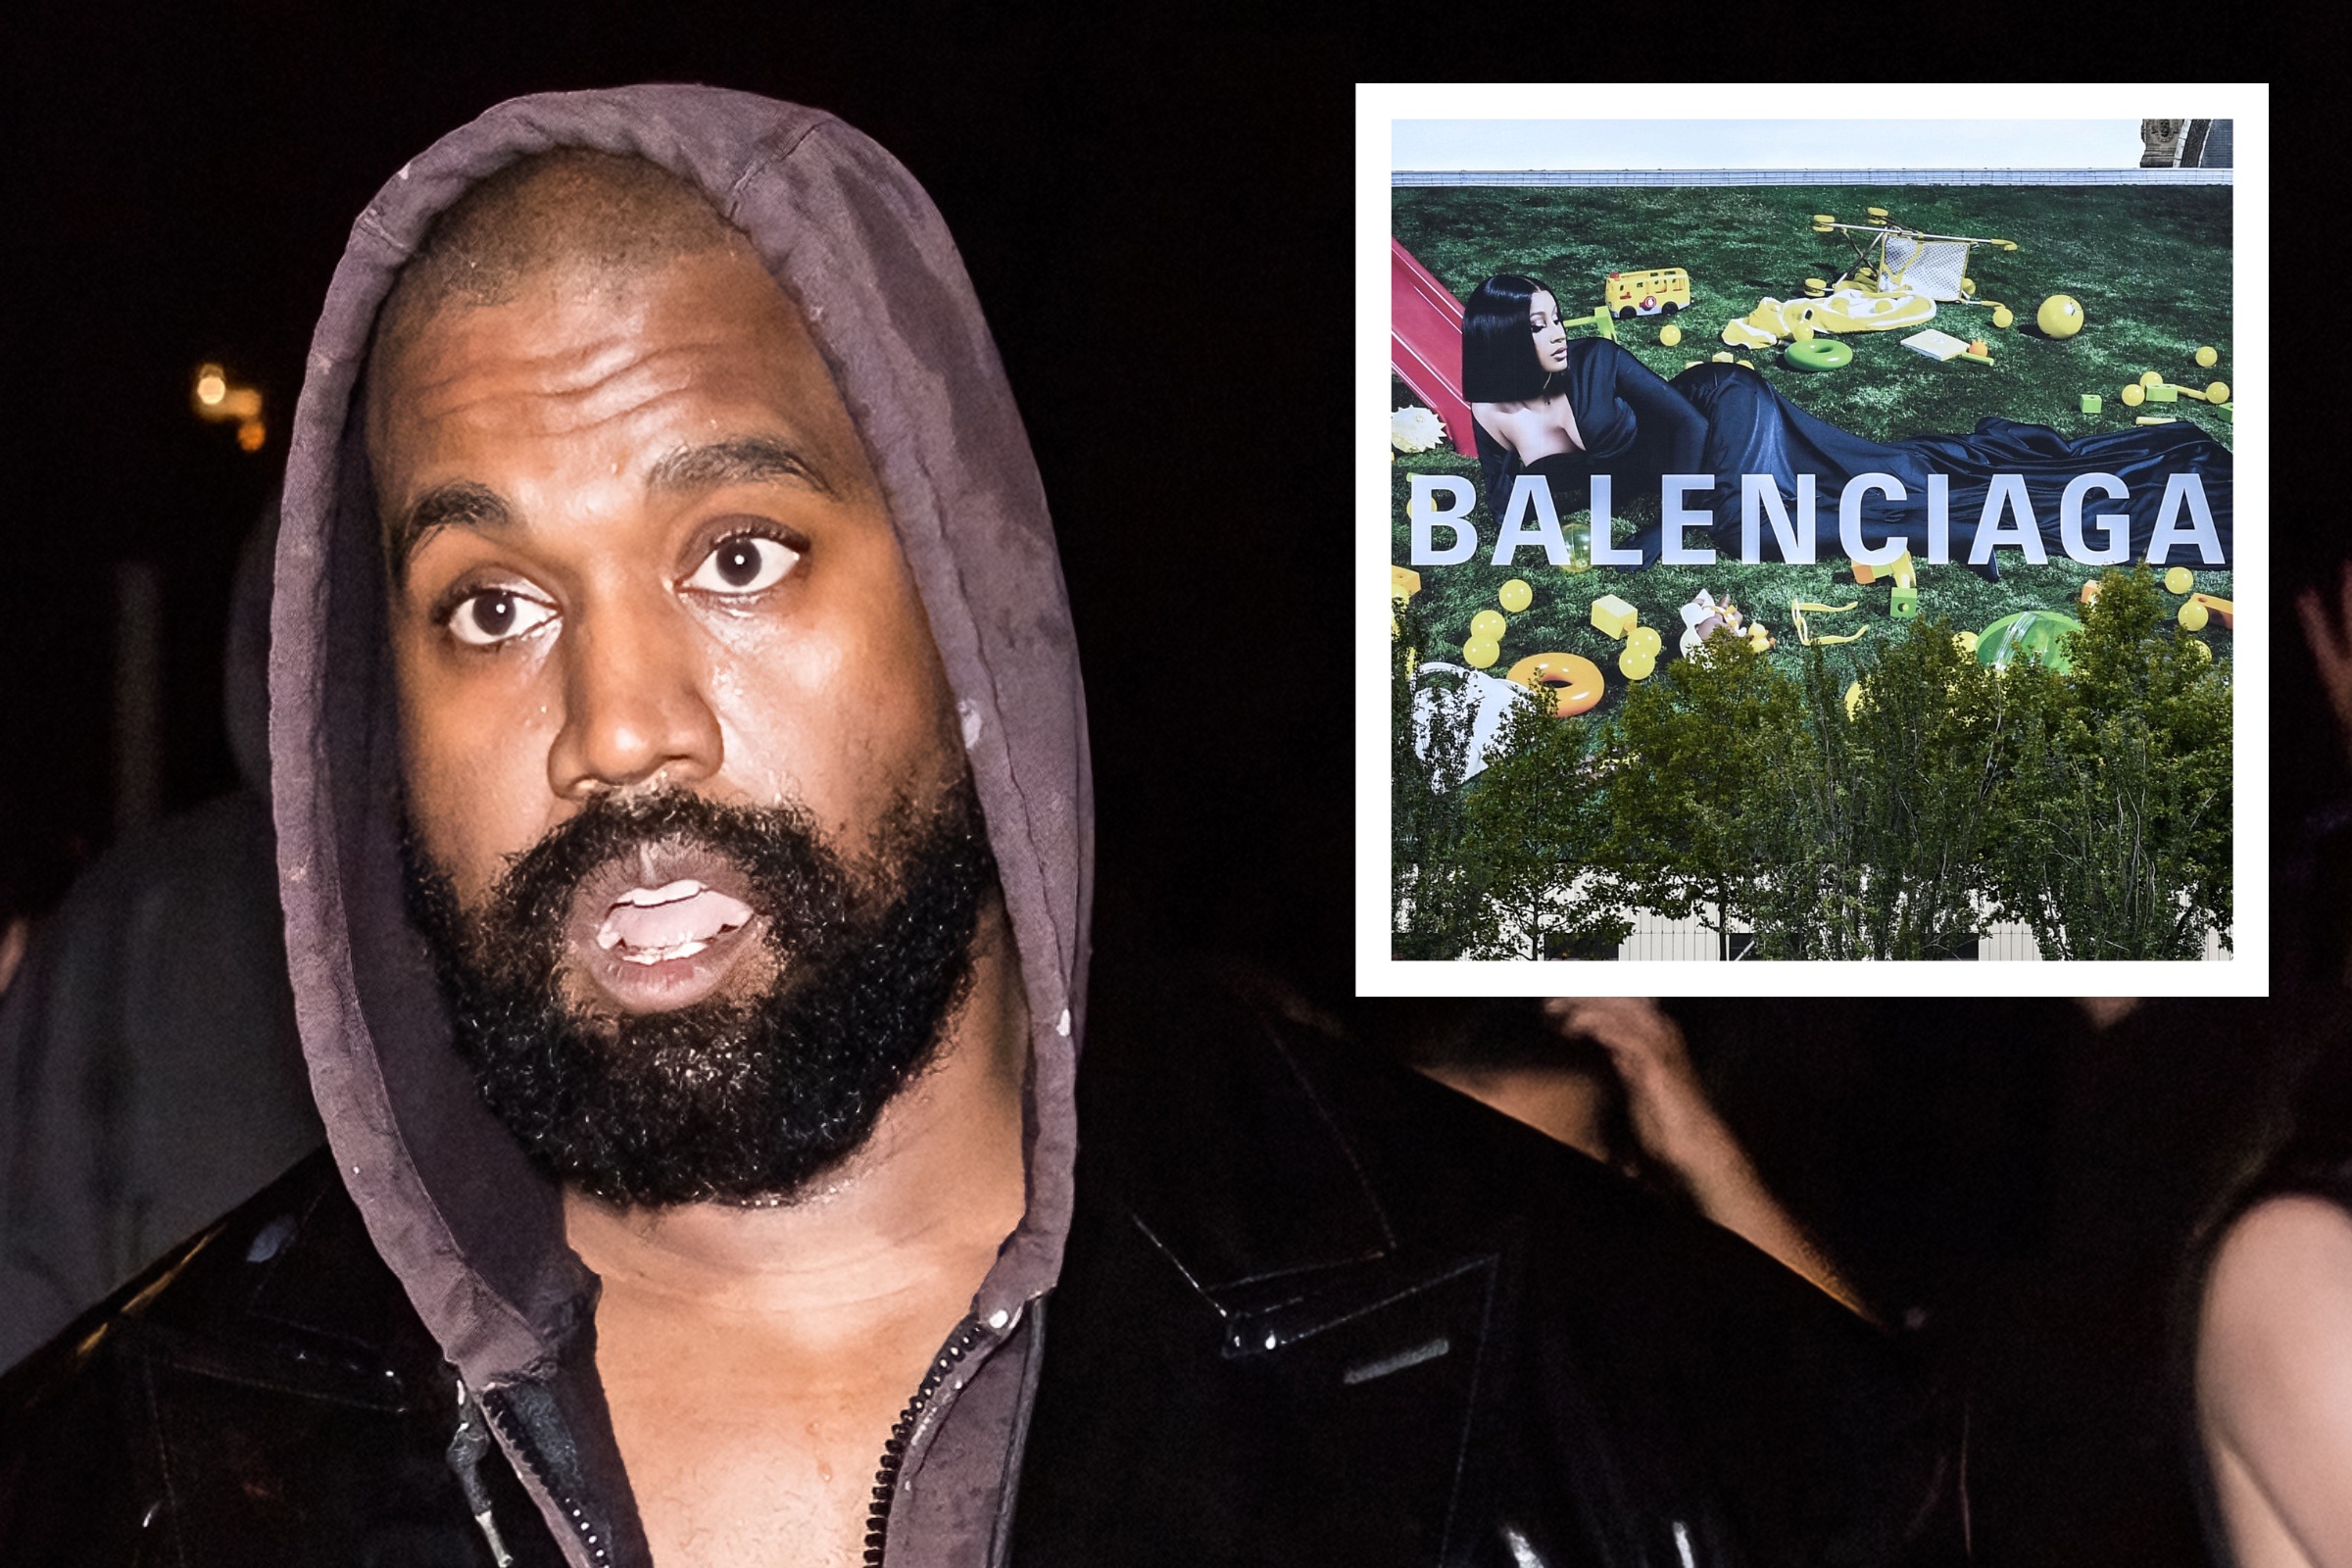 Balenciaga Fired Kanye For a Tweet. What Do They Deserve for